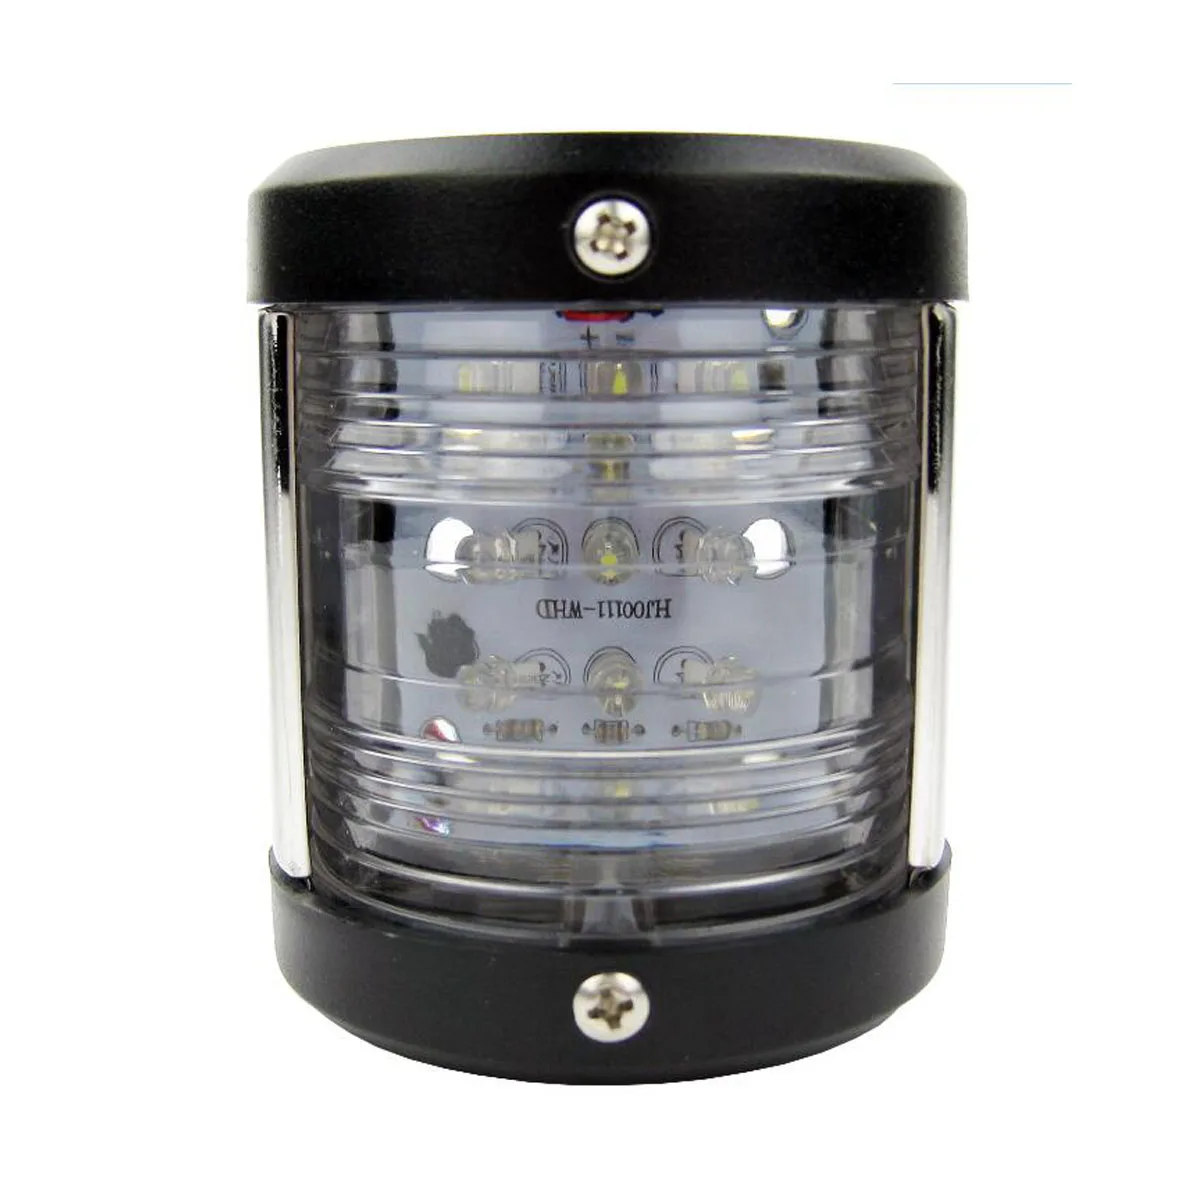 Boat Black Plastic 12V LED/Tungsten Low Side Lamp 225 Degree Waterproof Masthead and Stern Navigation White Light 50w 100w optional led light waterproof outdoor night lights lodine tungsten lamp wide applications